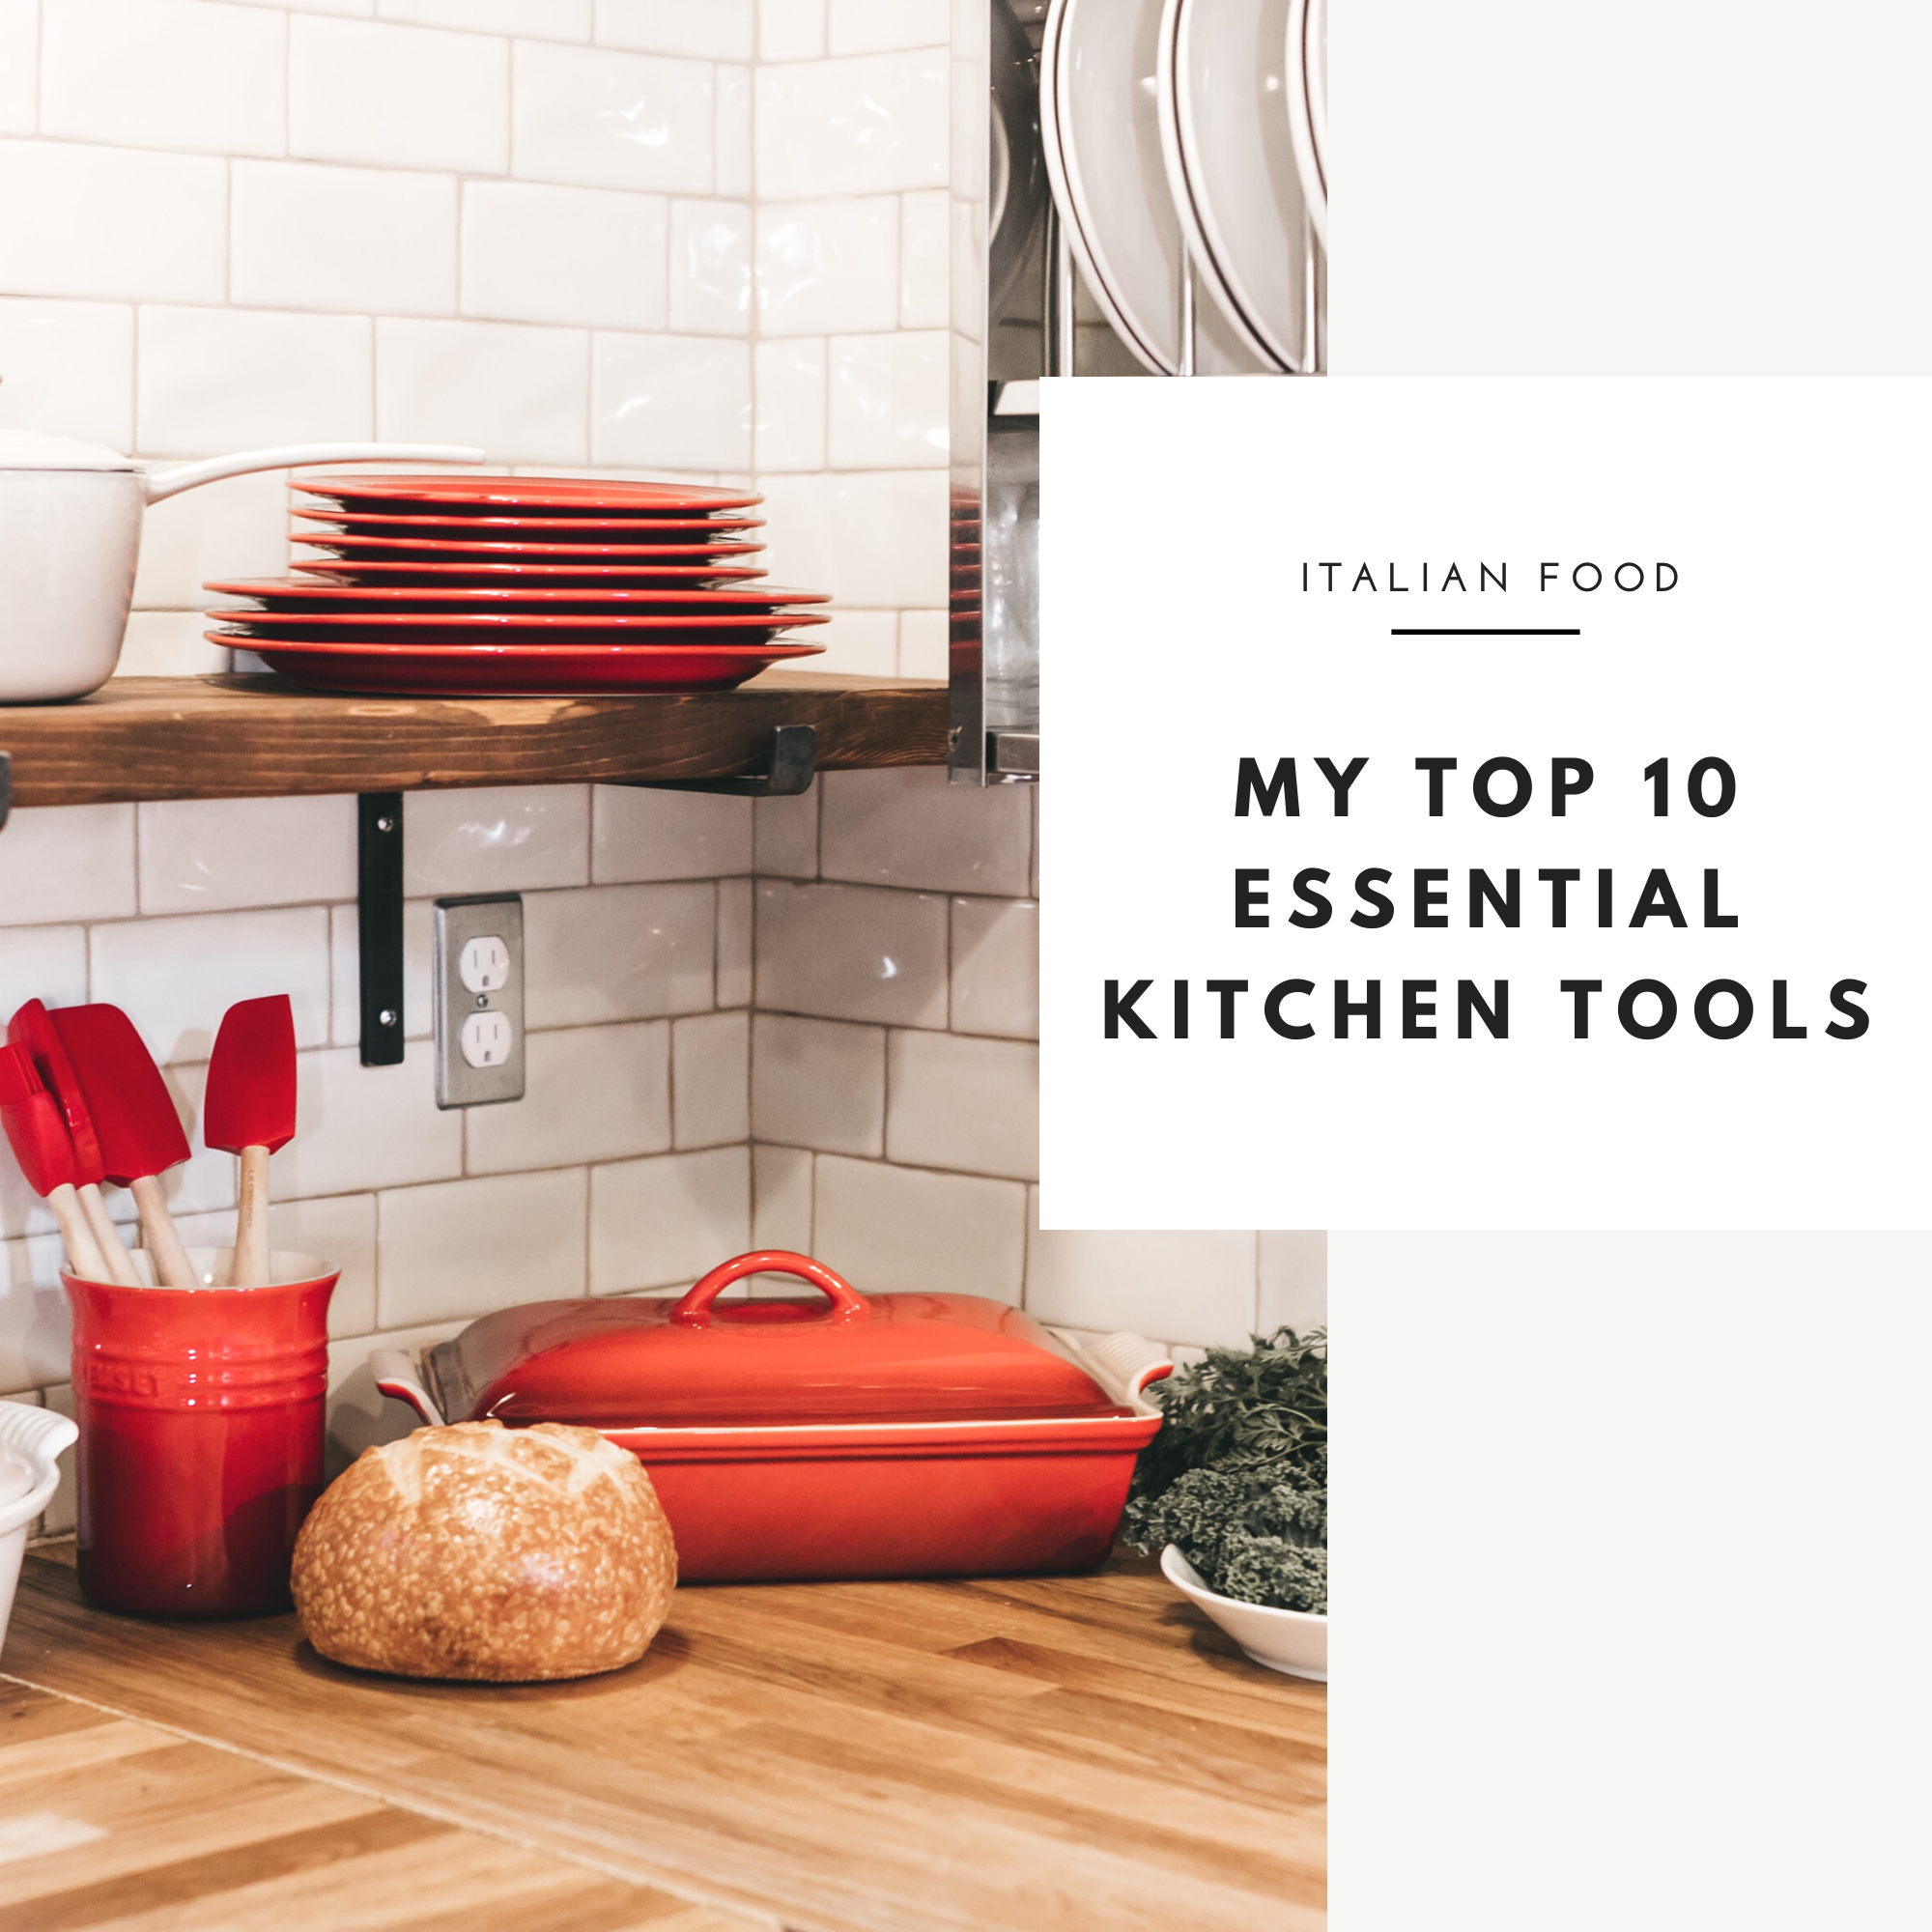 My top 10 essential kitchen tools.